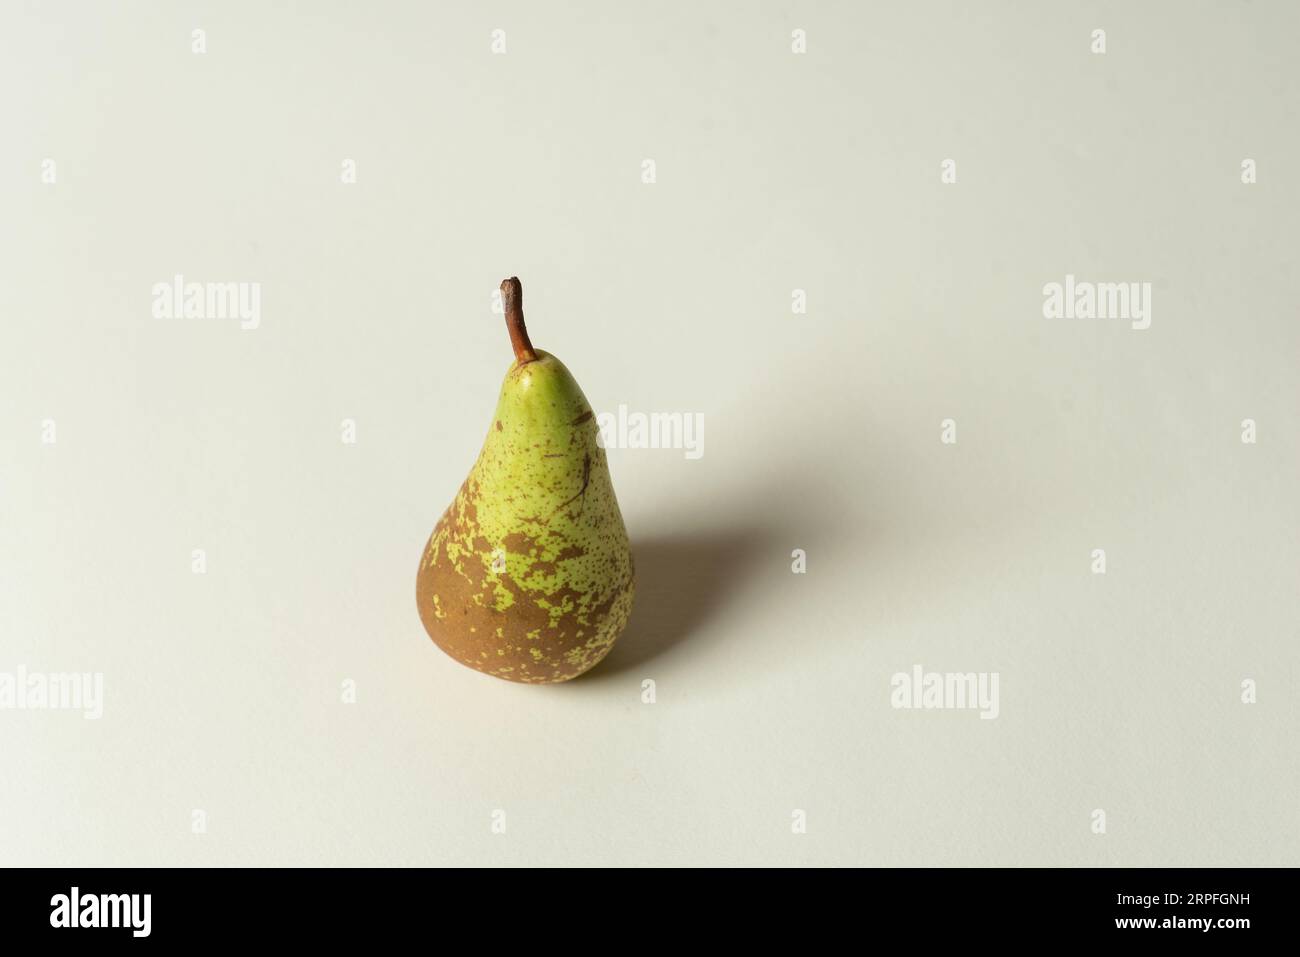 Large, green, organic pear on a white background Stock Photo